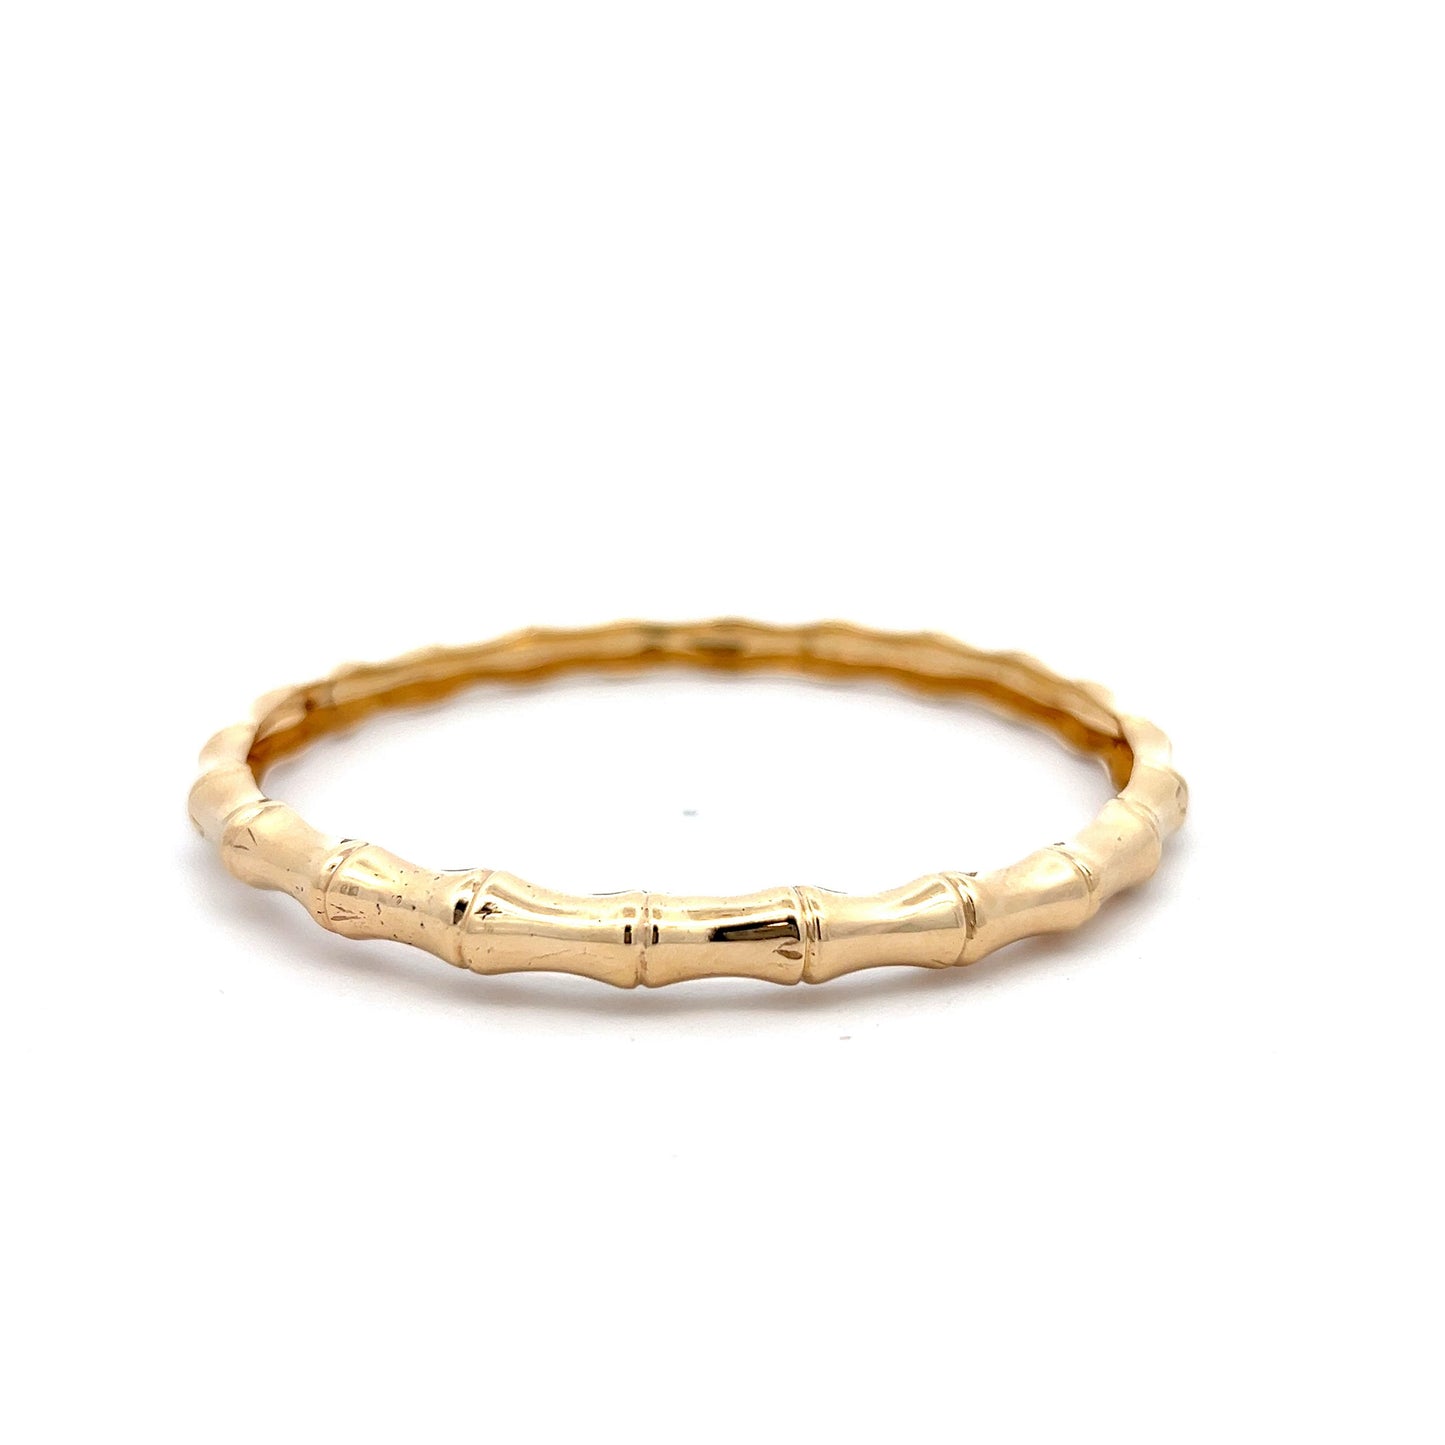 Textured Bamboo Bangle Bracelet in 14k Yellow Gold